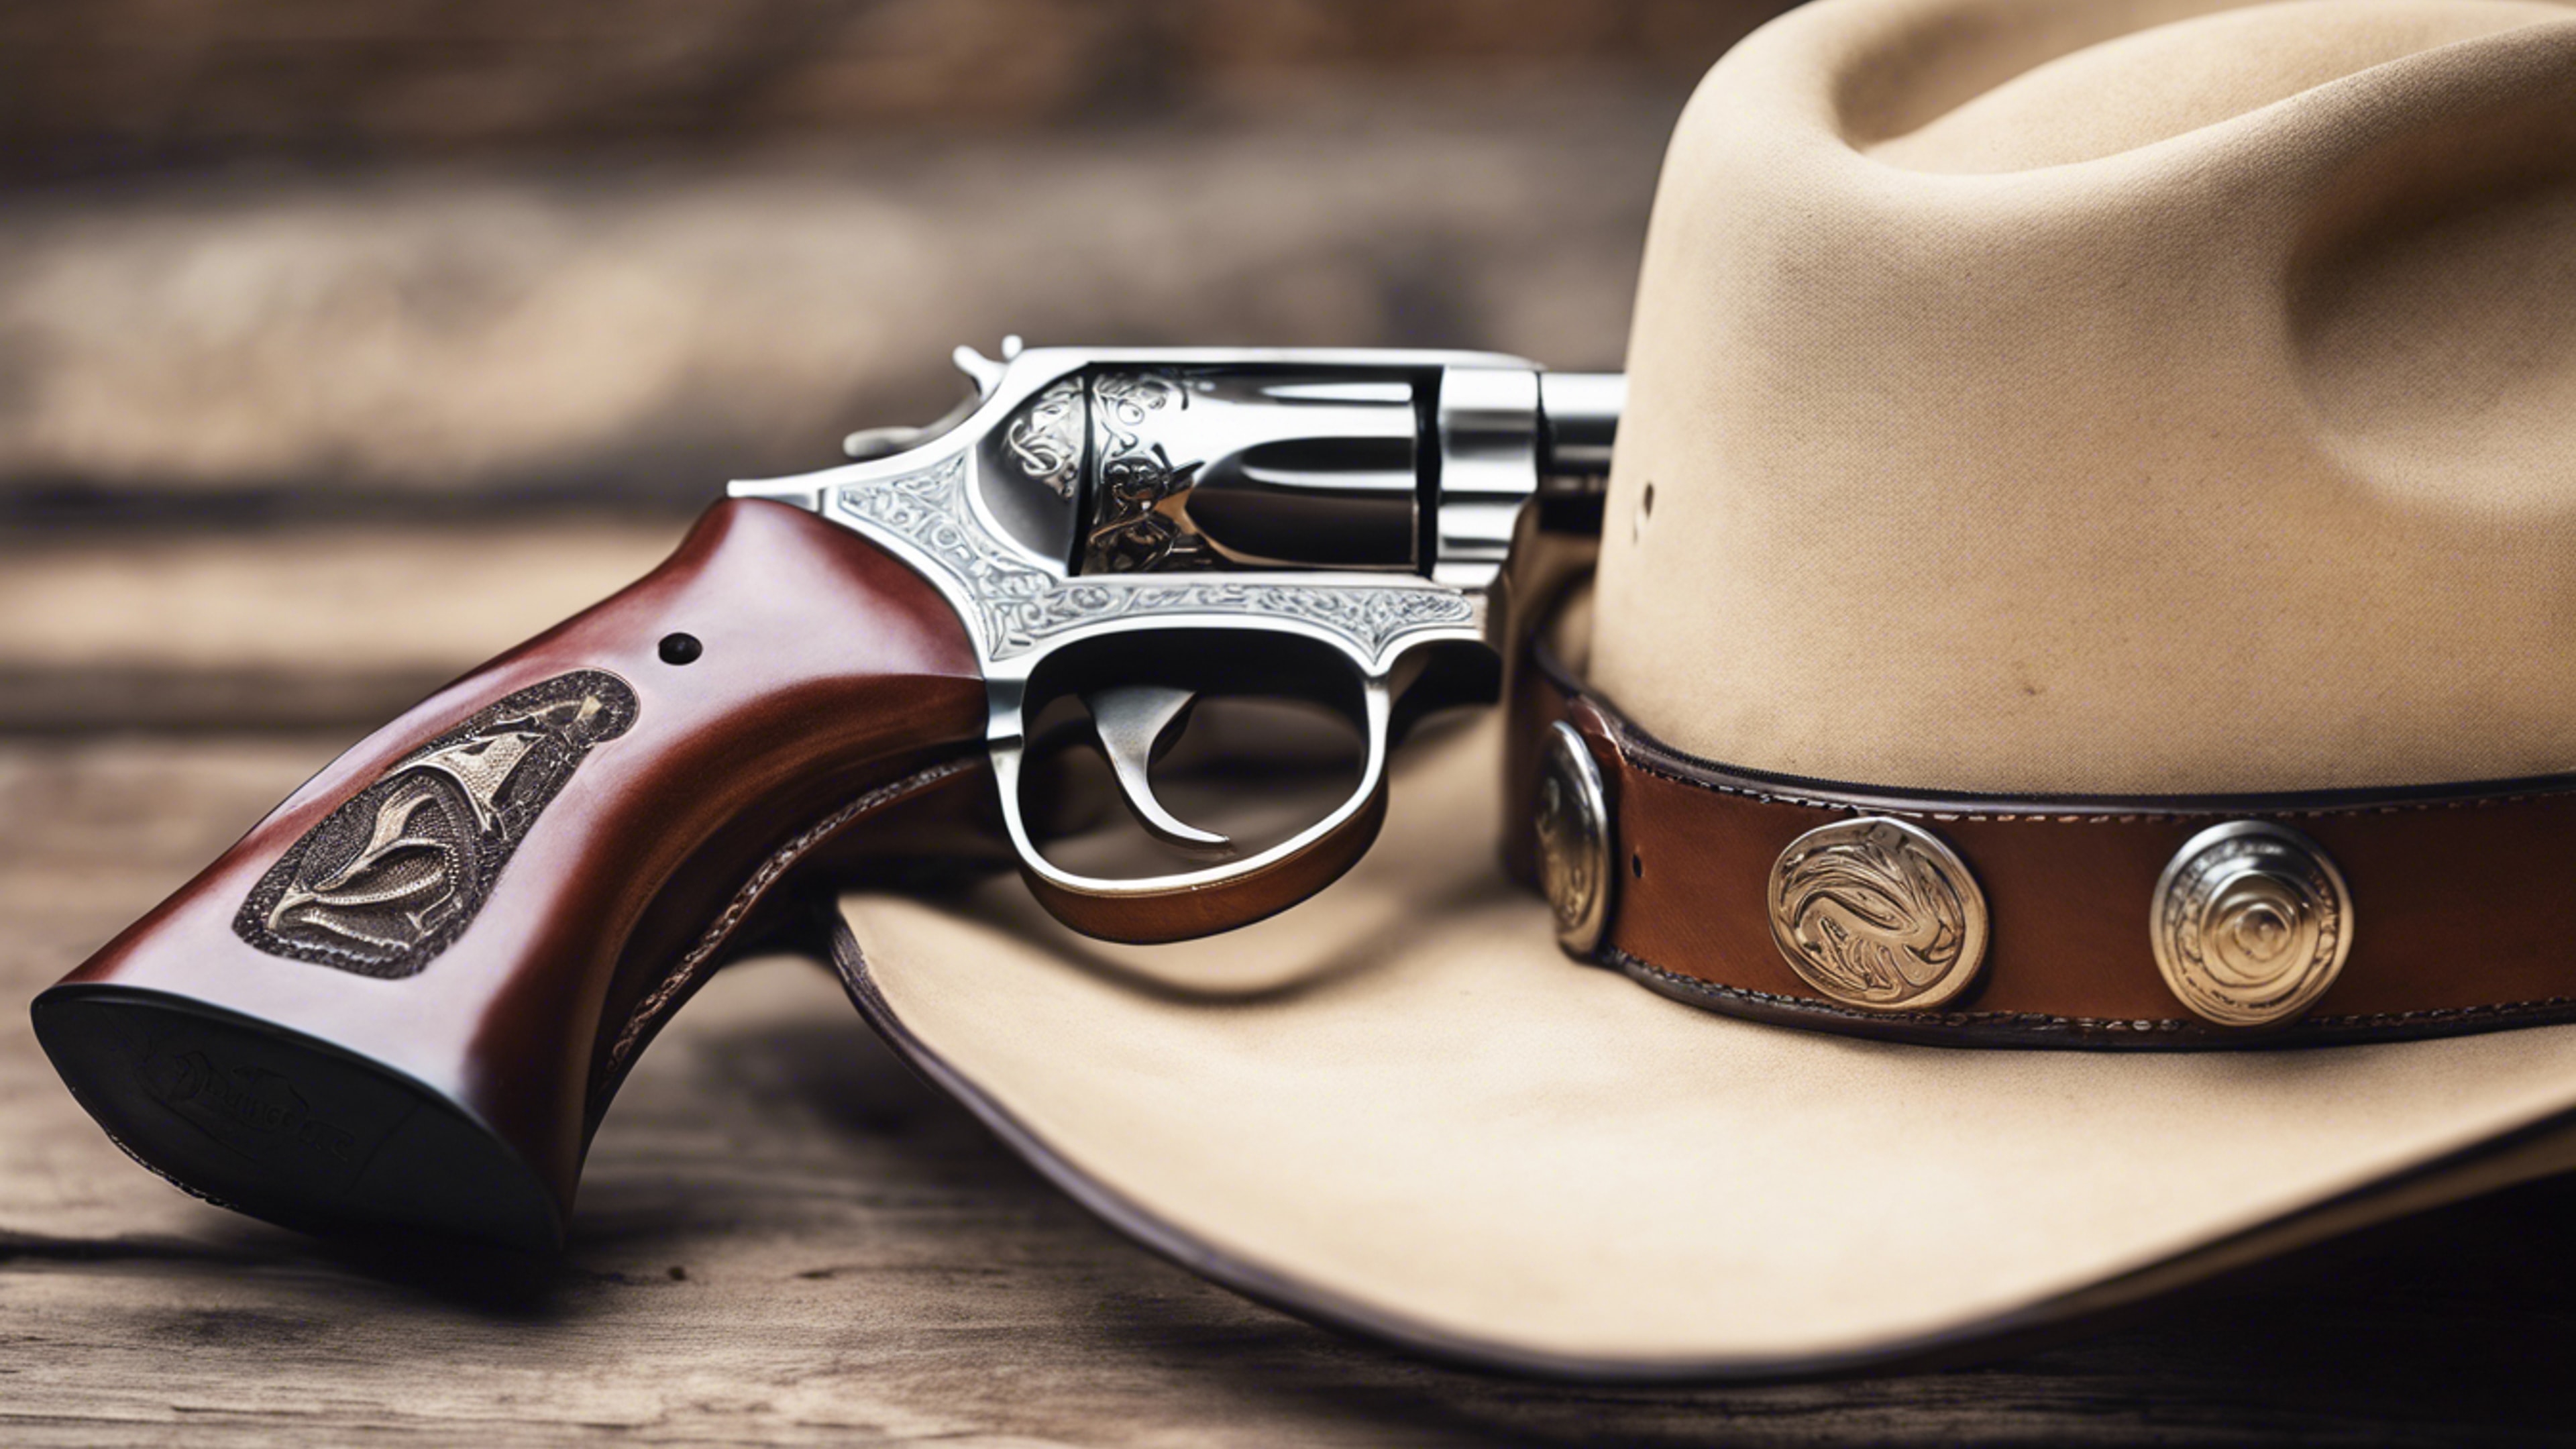 A detailed close-up of a cowboy hat, spurs, and a leather holster with a revolver. Wallpaper[6dbcb72083d24ad78673]